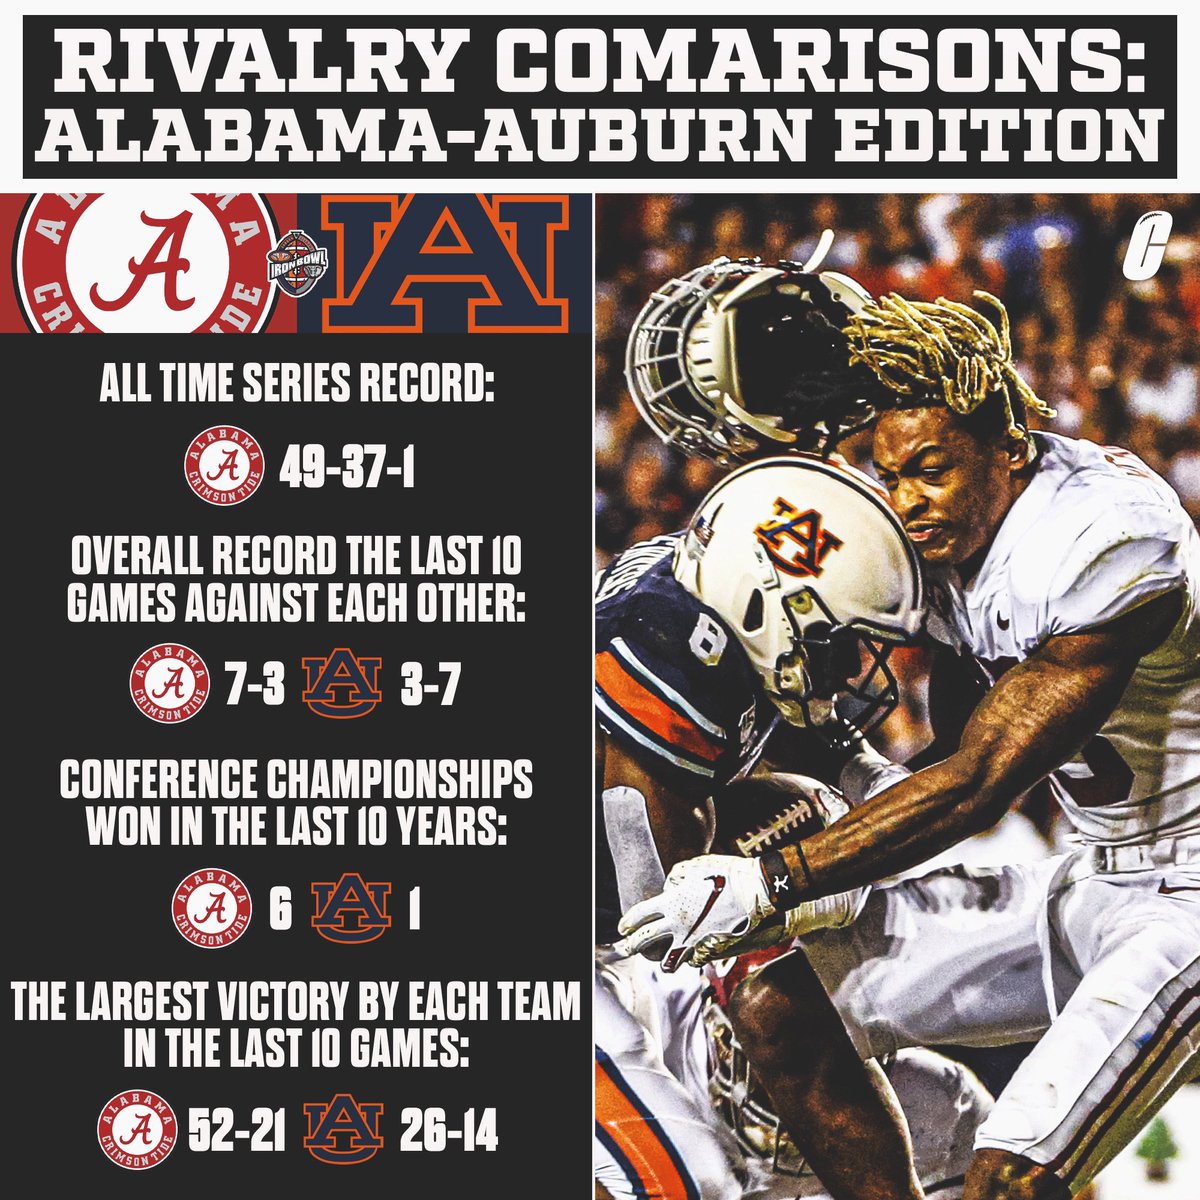 College Football Rivalry comparisons (part 2)

Iron Bowl: Auburn vs. Alabama

Where does this rivalry rank? https://t.co/iG5RglB3s5